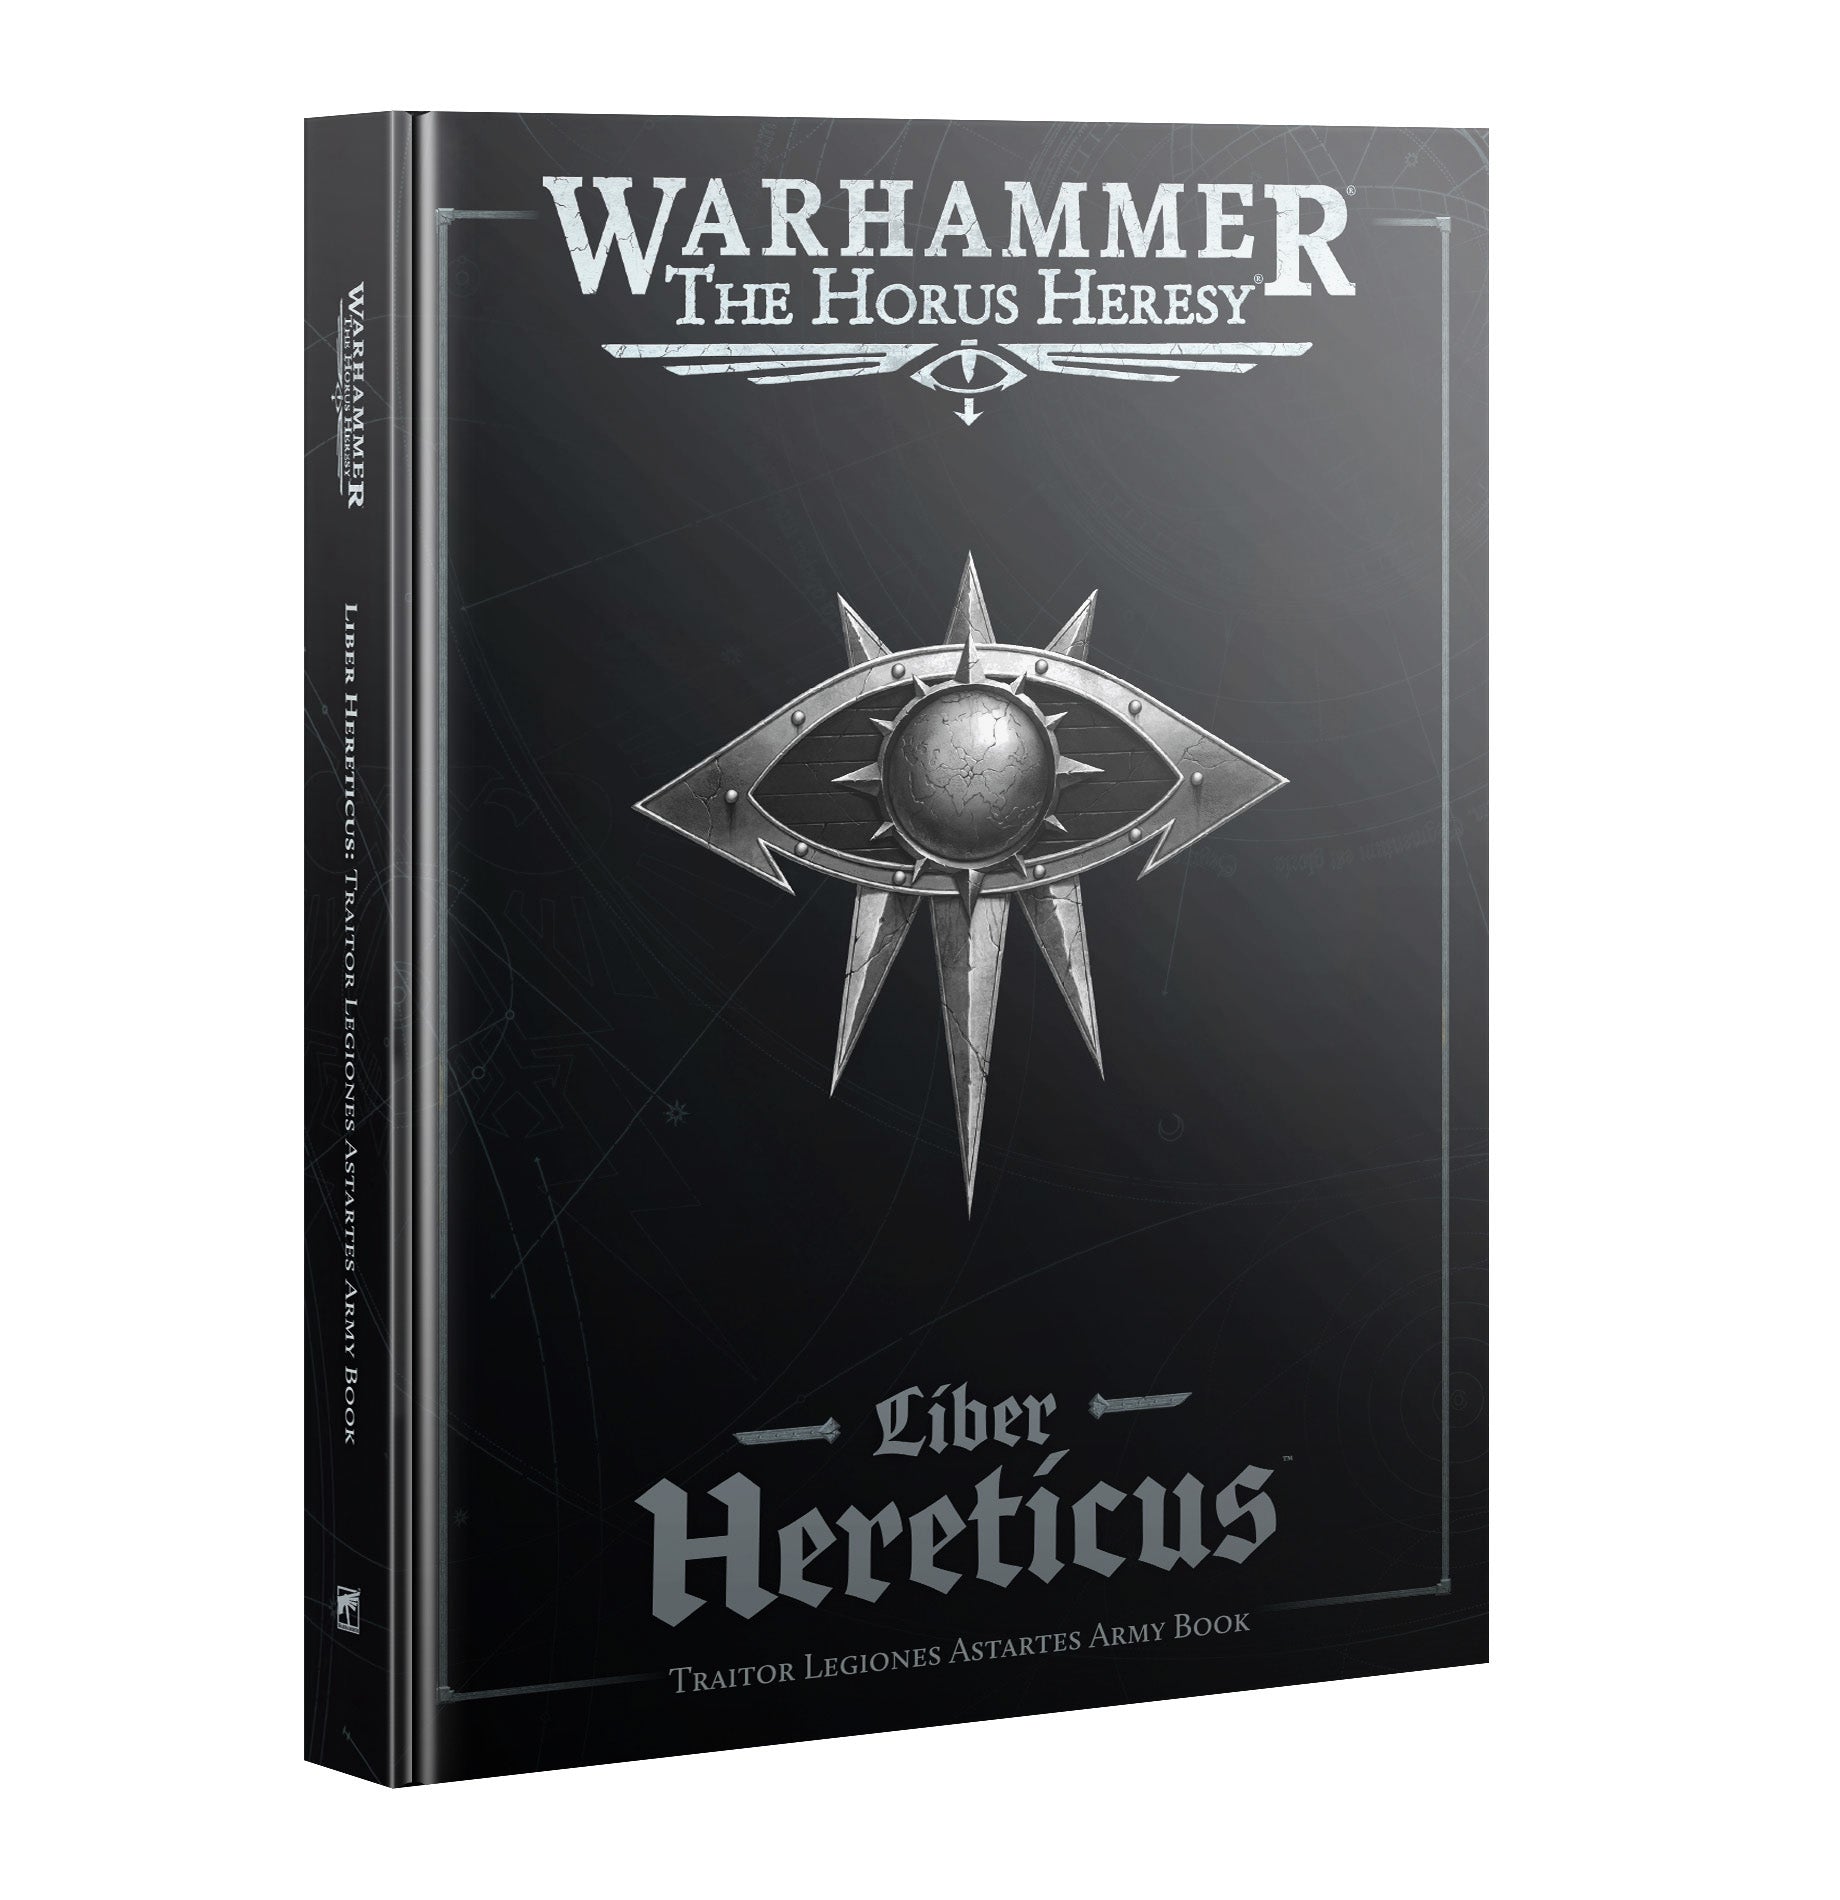 Warhammer: The Horus Heresy - Liber Hereticus Traitor Legiones Astartes Army Book - Bards & Cards